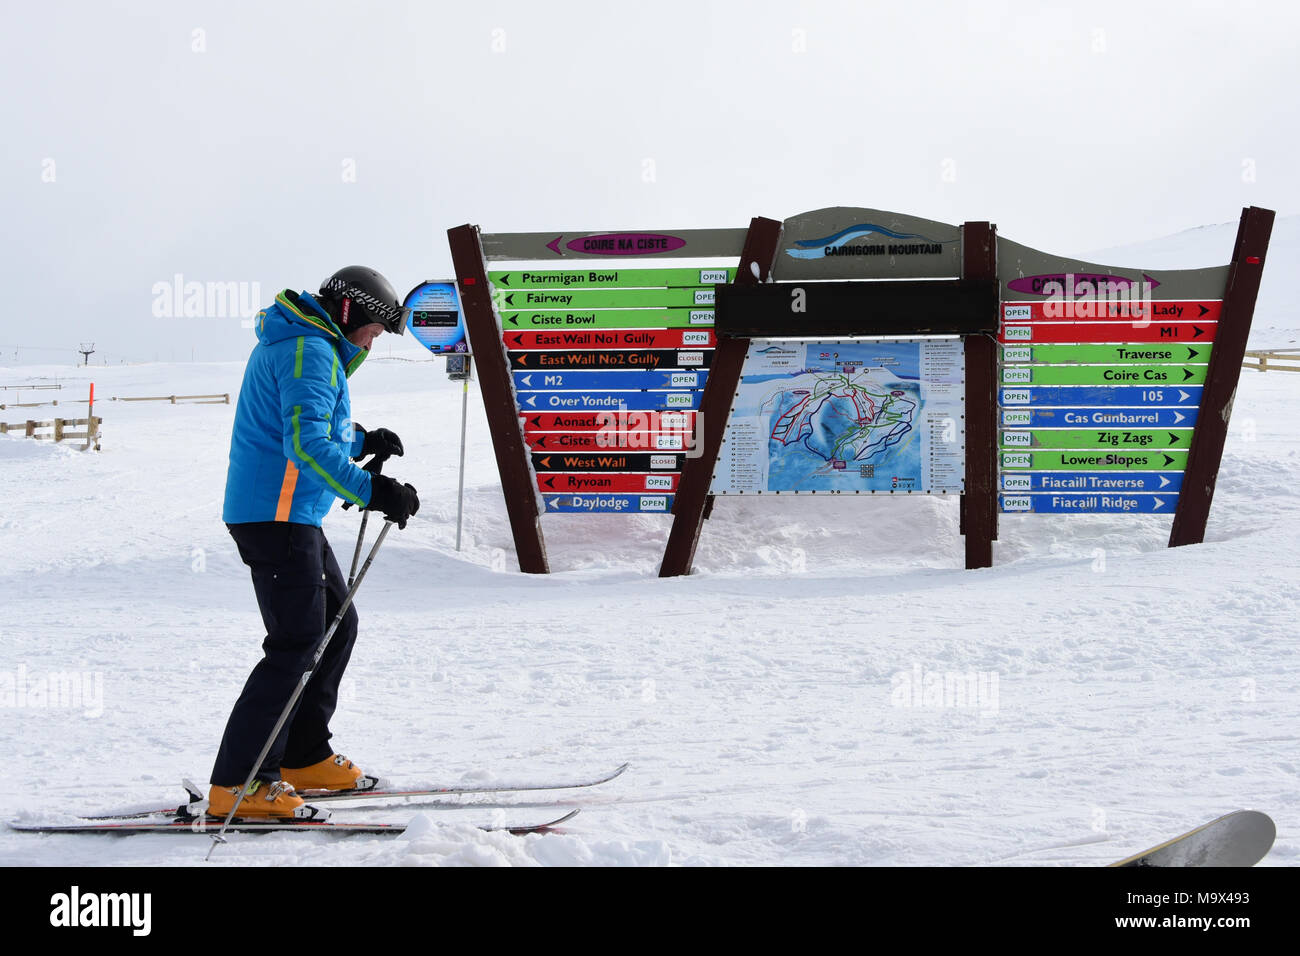 Aviemore, Scotland, United Kingdom, 28, March, 2018. A skier passes an indicator board and piste map at Cairngorm Mountain ski centre, © Ken Jack / Alamy Live News Stock Photo